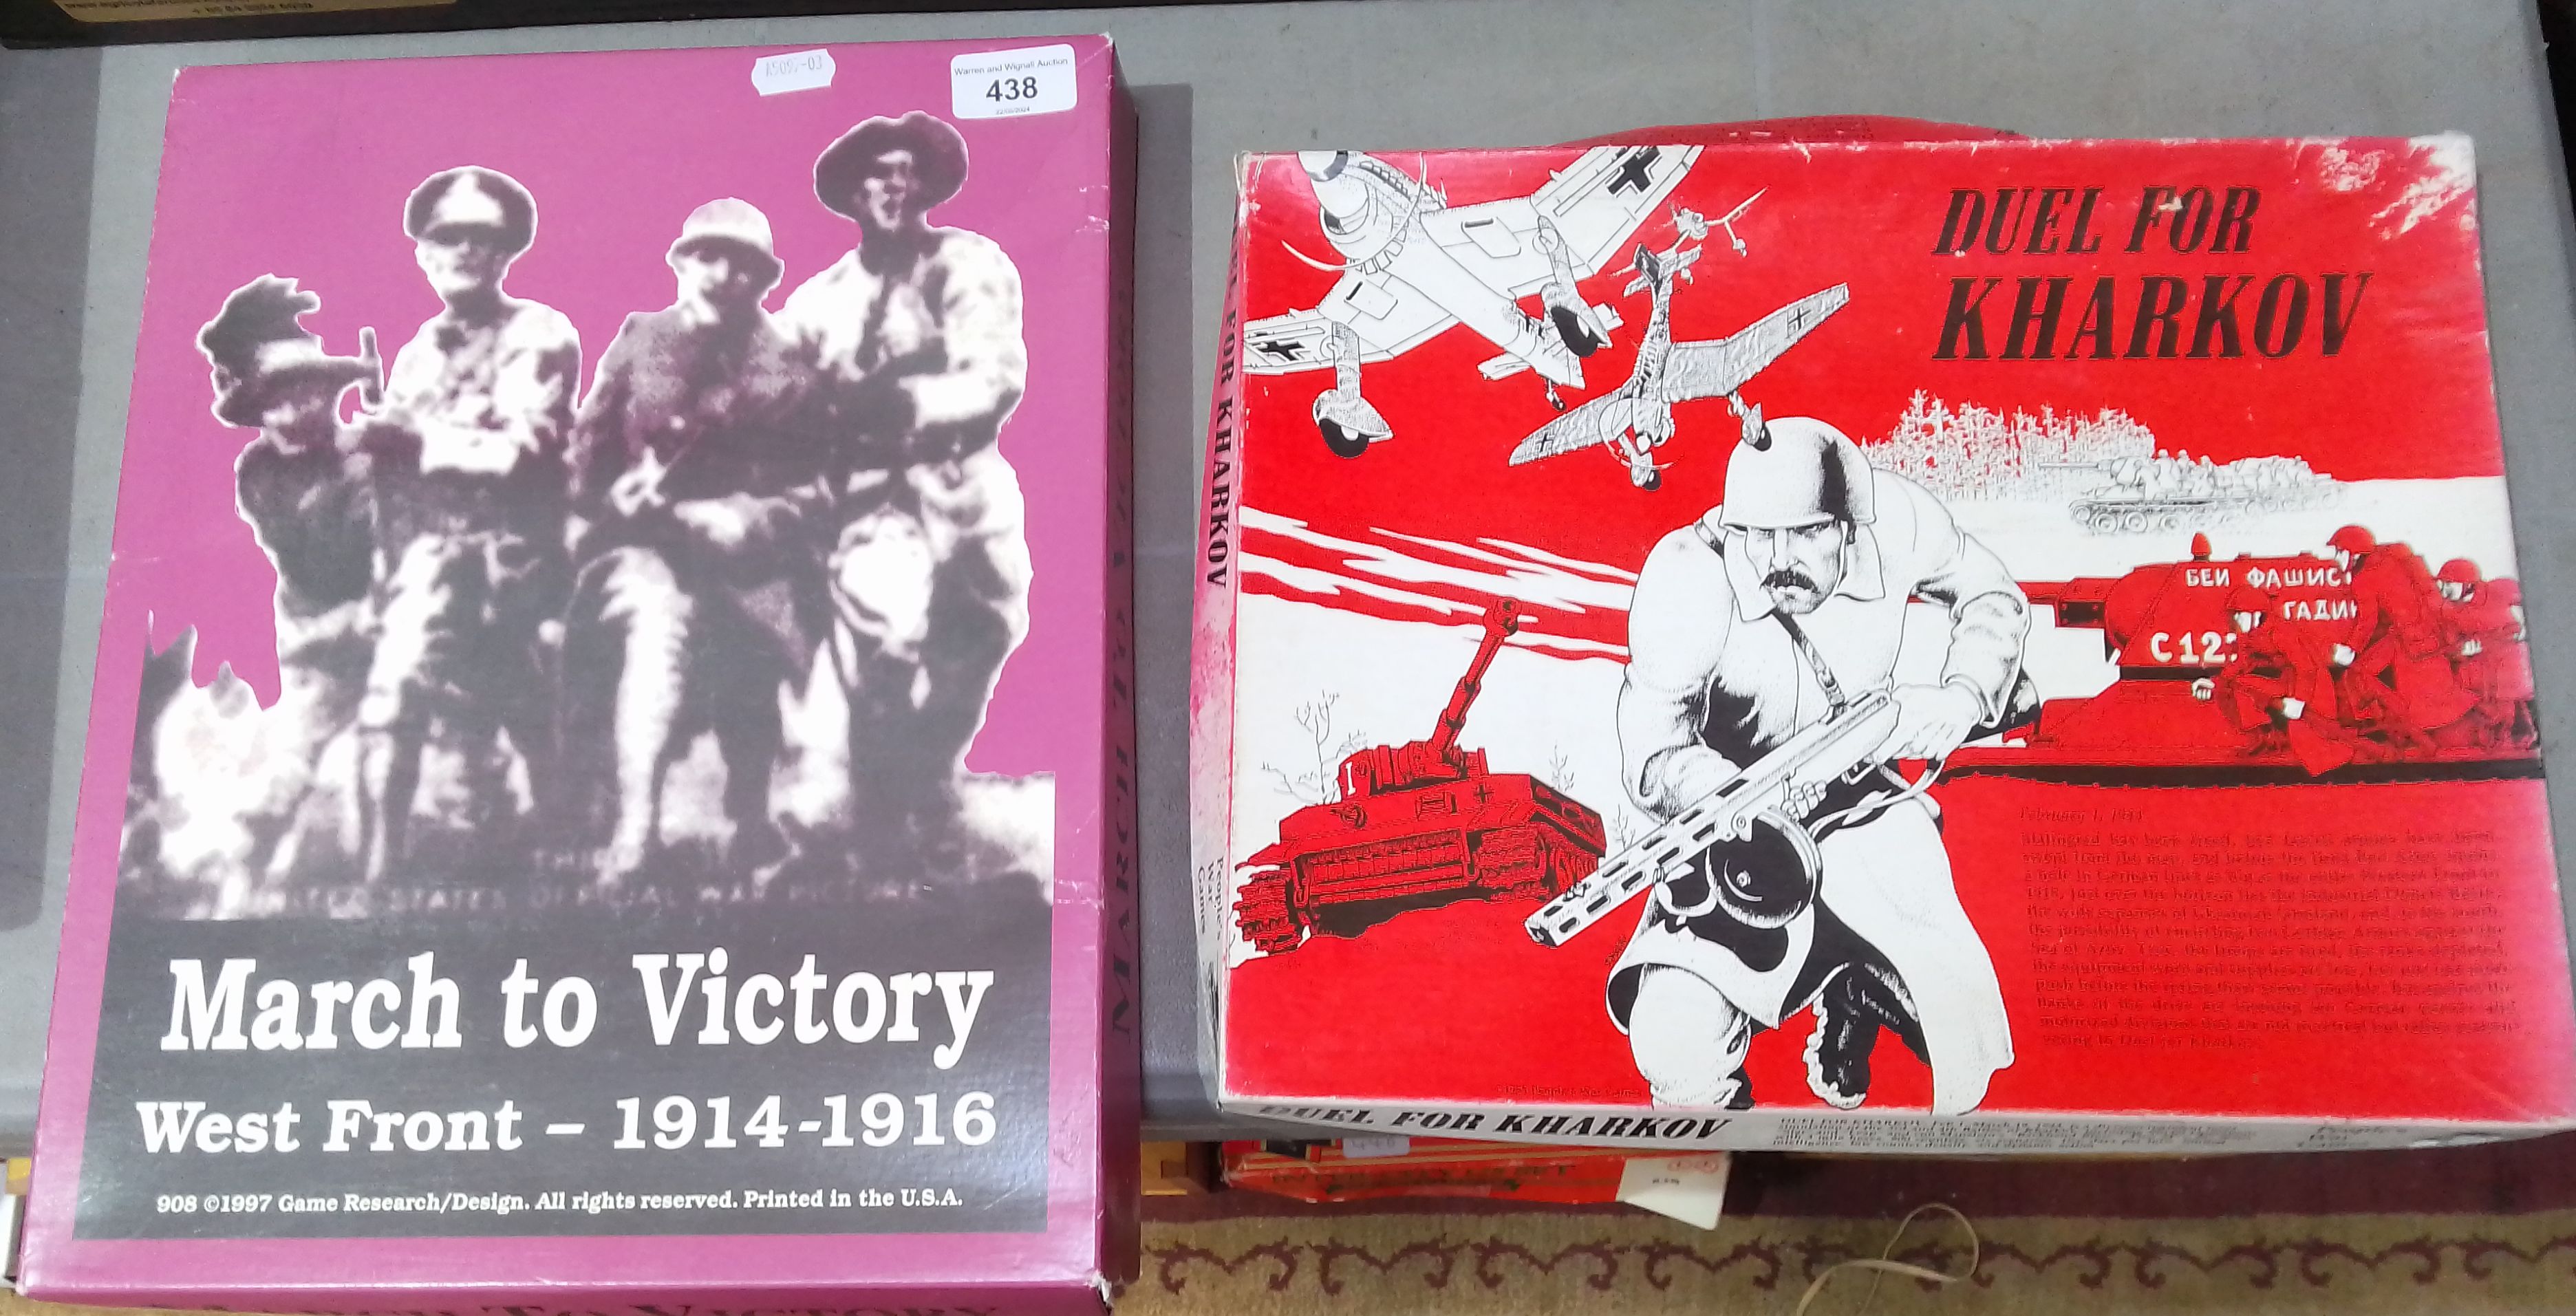 Two vintage strategic board games; 'Duel for Kharkov' and 'March to Victory', both un-punched.